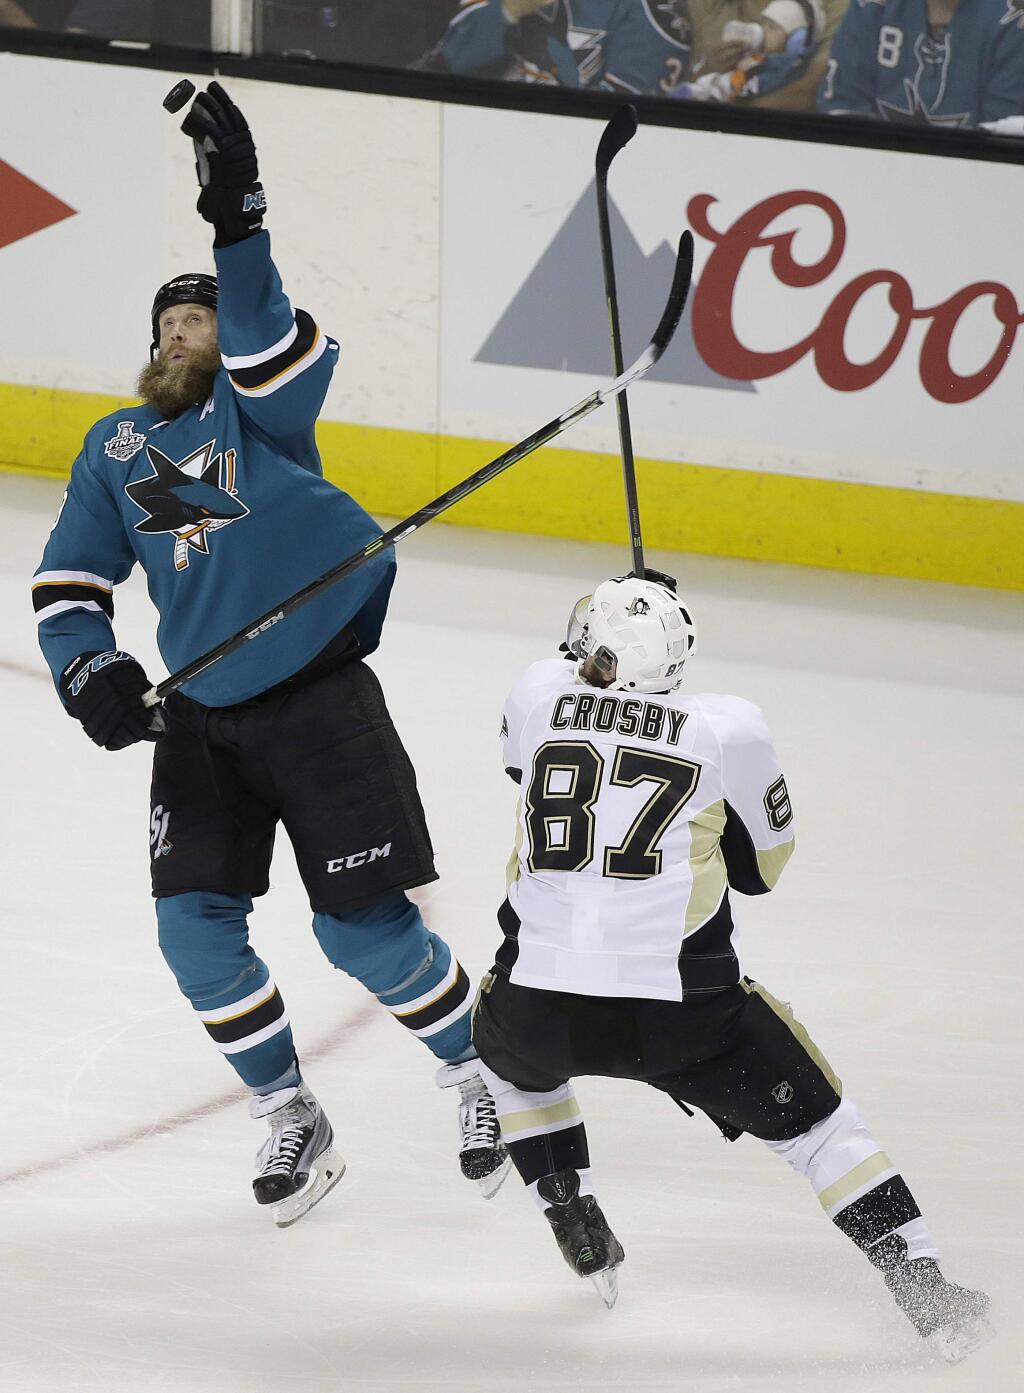 San Jose Sharks center Joe Thornton, left, reaches for the puck next to Pittsburgh Penguins center Sidney Crosby (87) during the second period of Game 3 of the NHL hockey Stanley Cup Finals in San Jose, Calif., Saturday, June 4, 2016. (AP Photo/Eric Risberg)